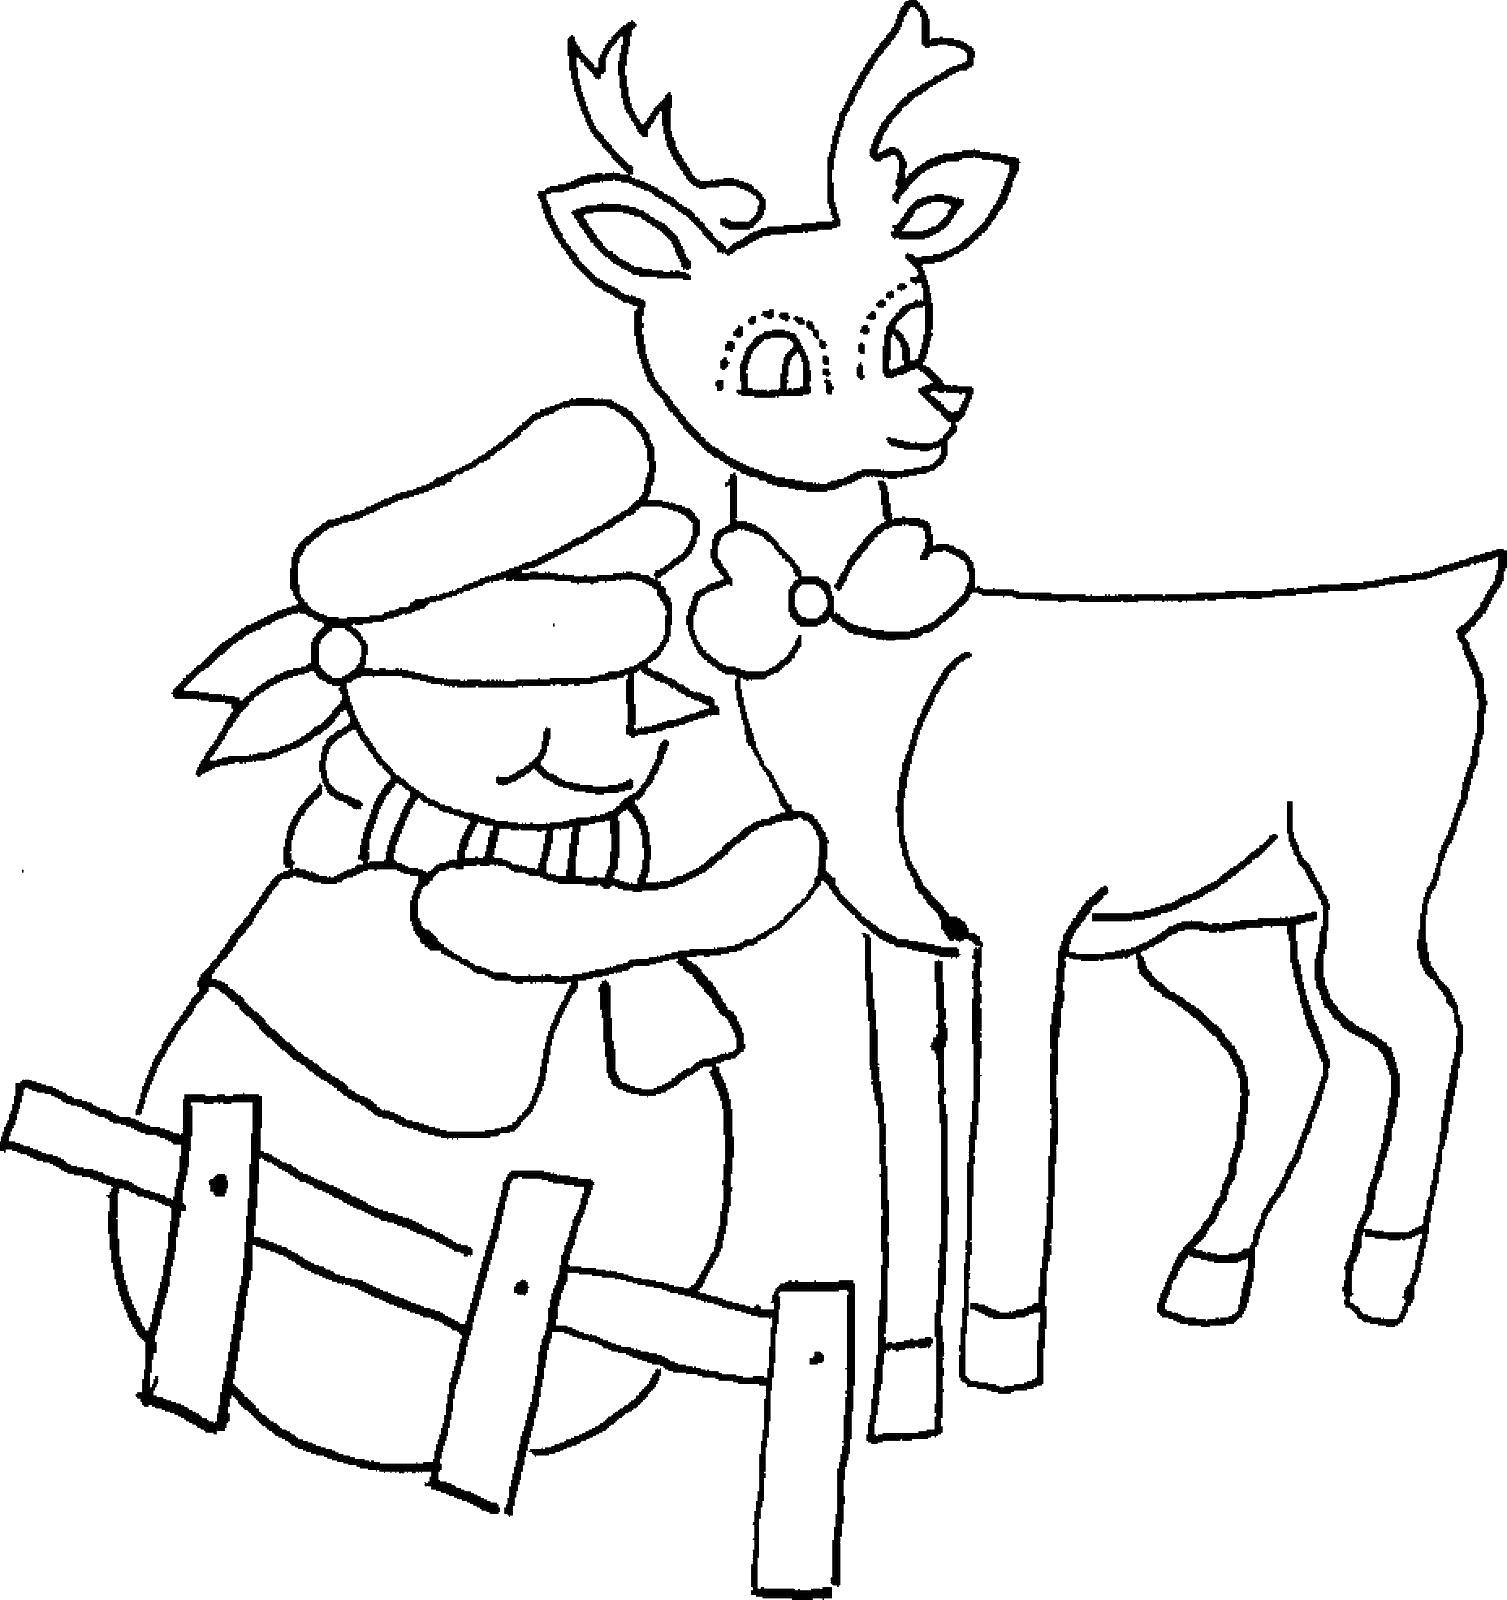 Coloring The deer and the snowman. Category snowman. Tags:  Snowman, snow, winter.